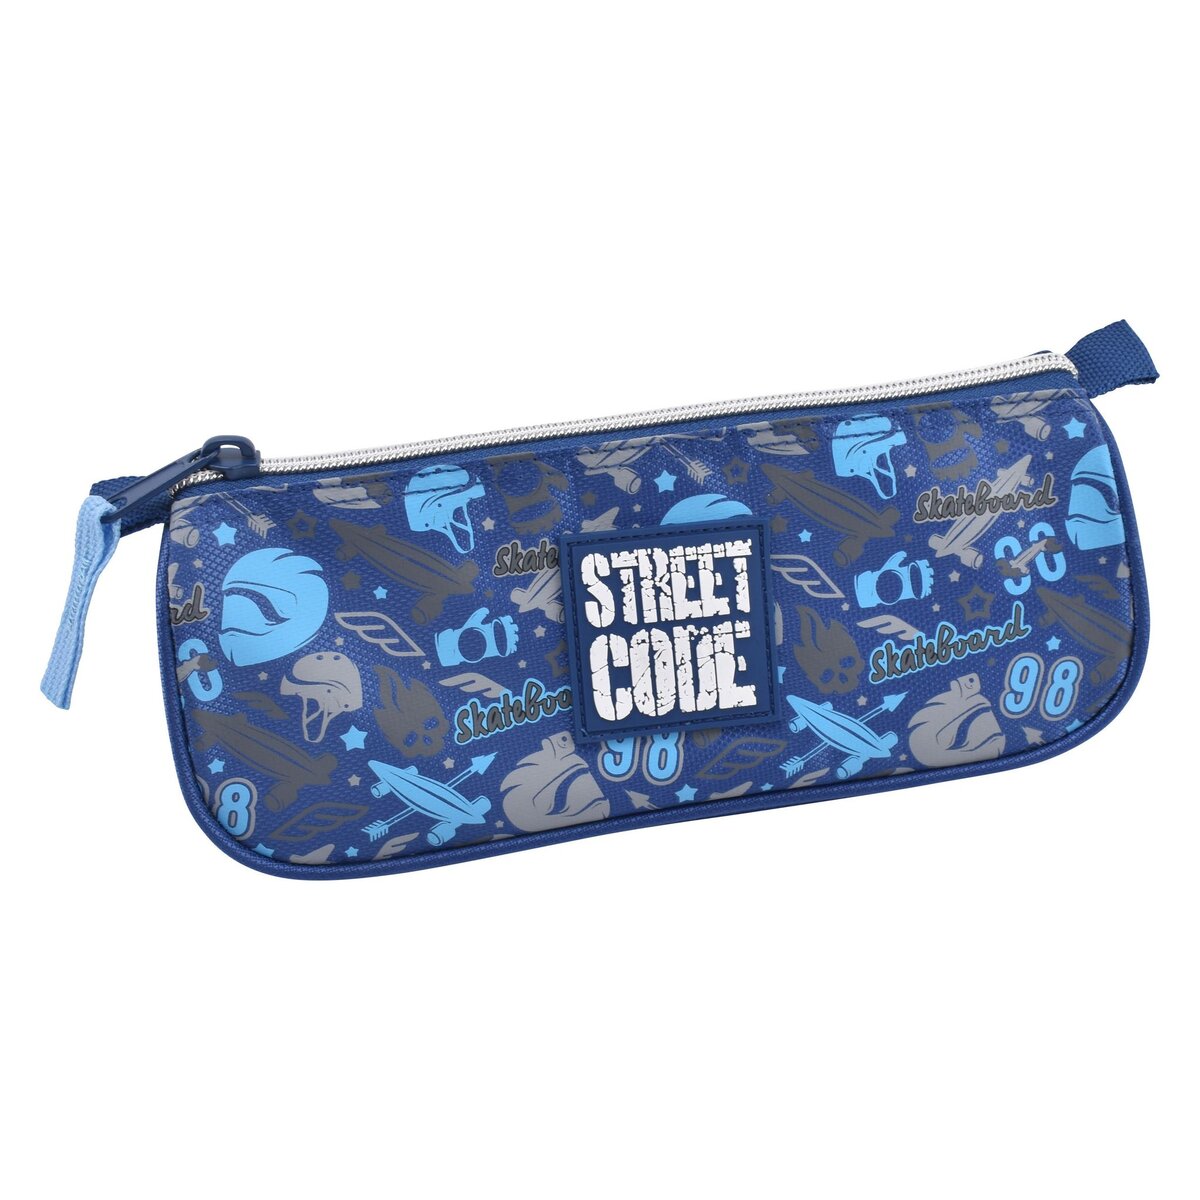 AUCHAN Trousse scolaire triangulaire polyester bleu SPORT STREET CODE